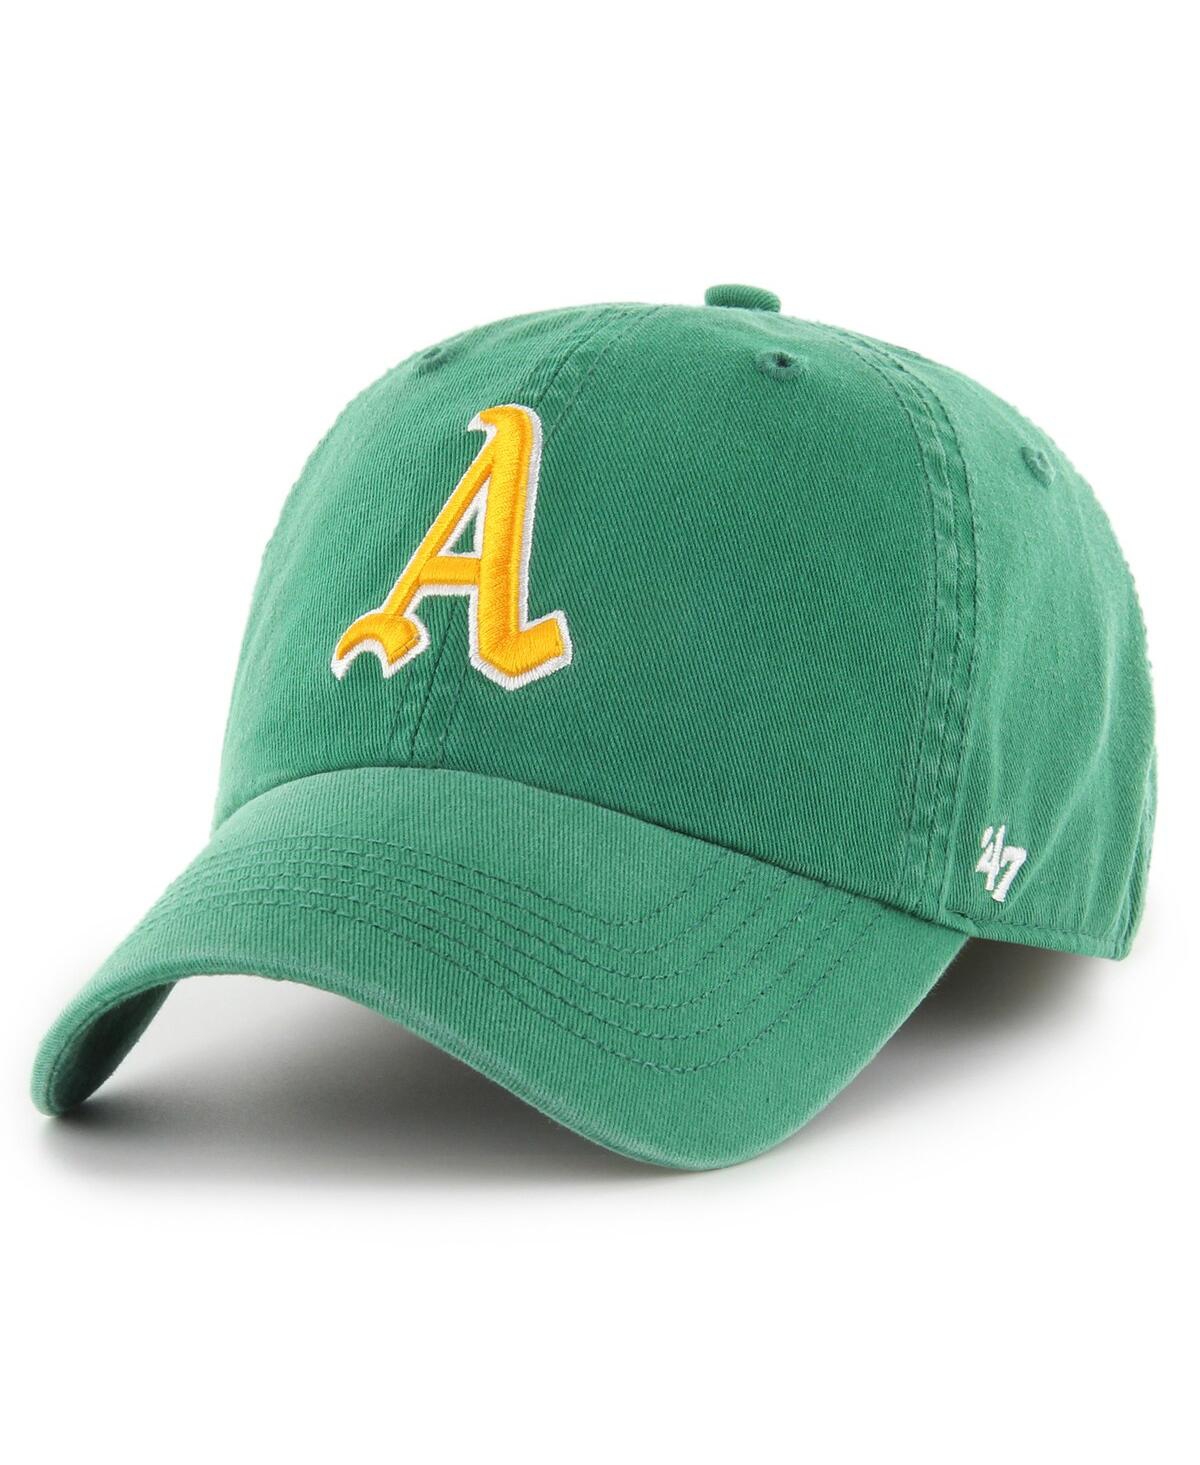 47 Brand Men's ' Green Oakland Athletics Cooperstown Collection Franchise Fitted Hat